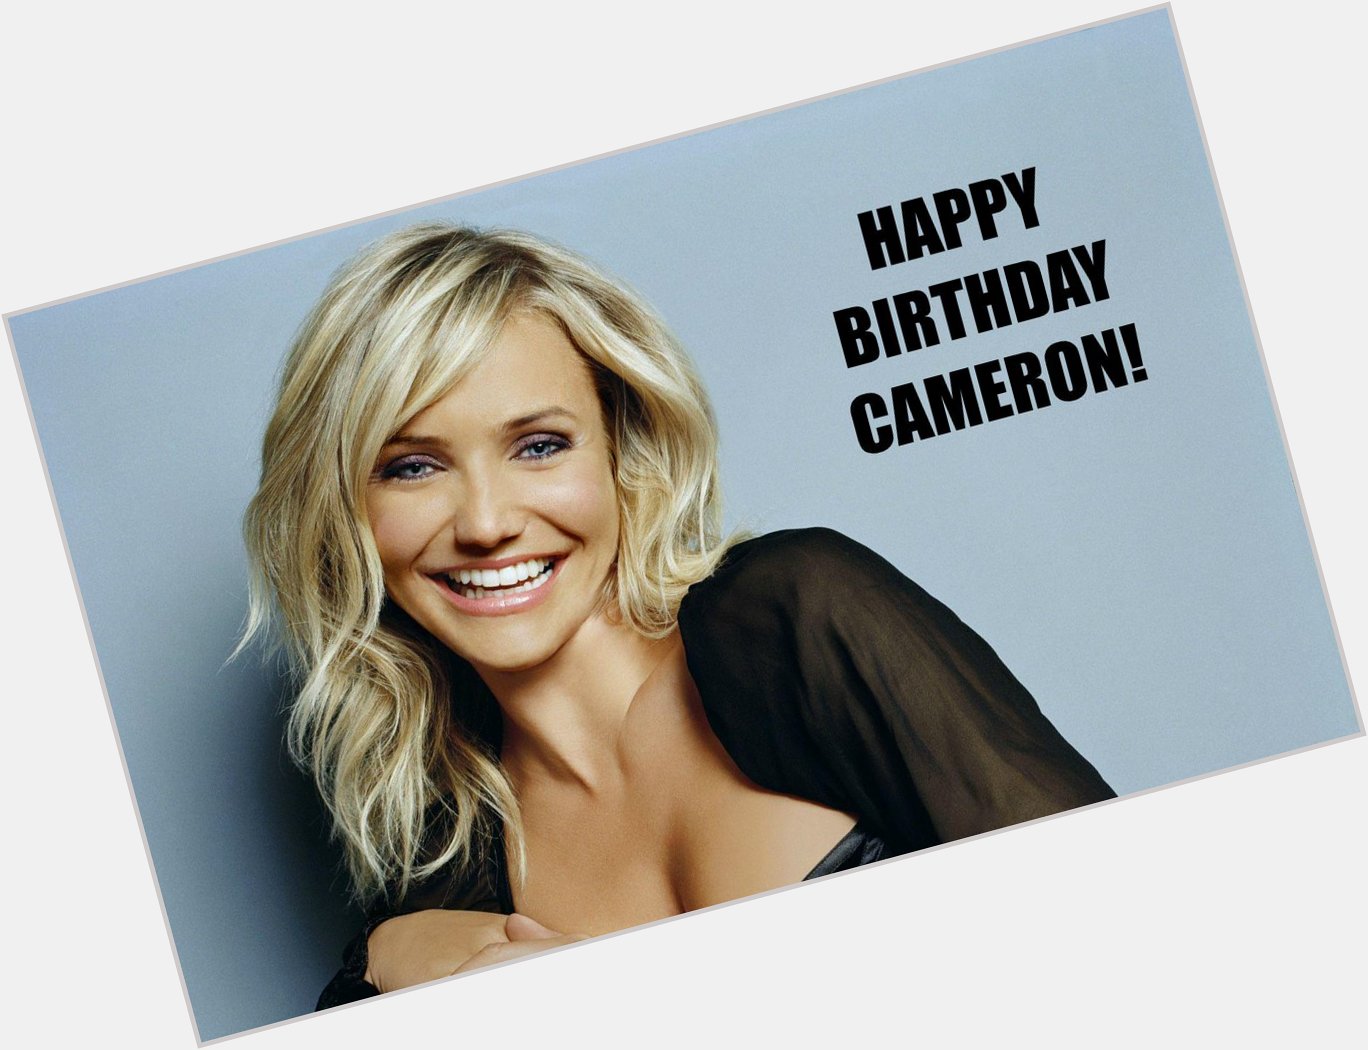 Happy 43rd Birthday to Cameron Diaz! What is your all-time favorite Diaz movie?  